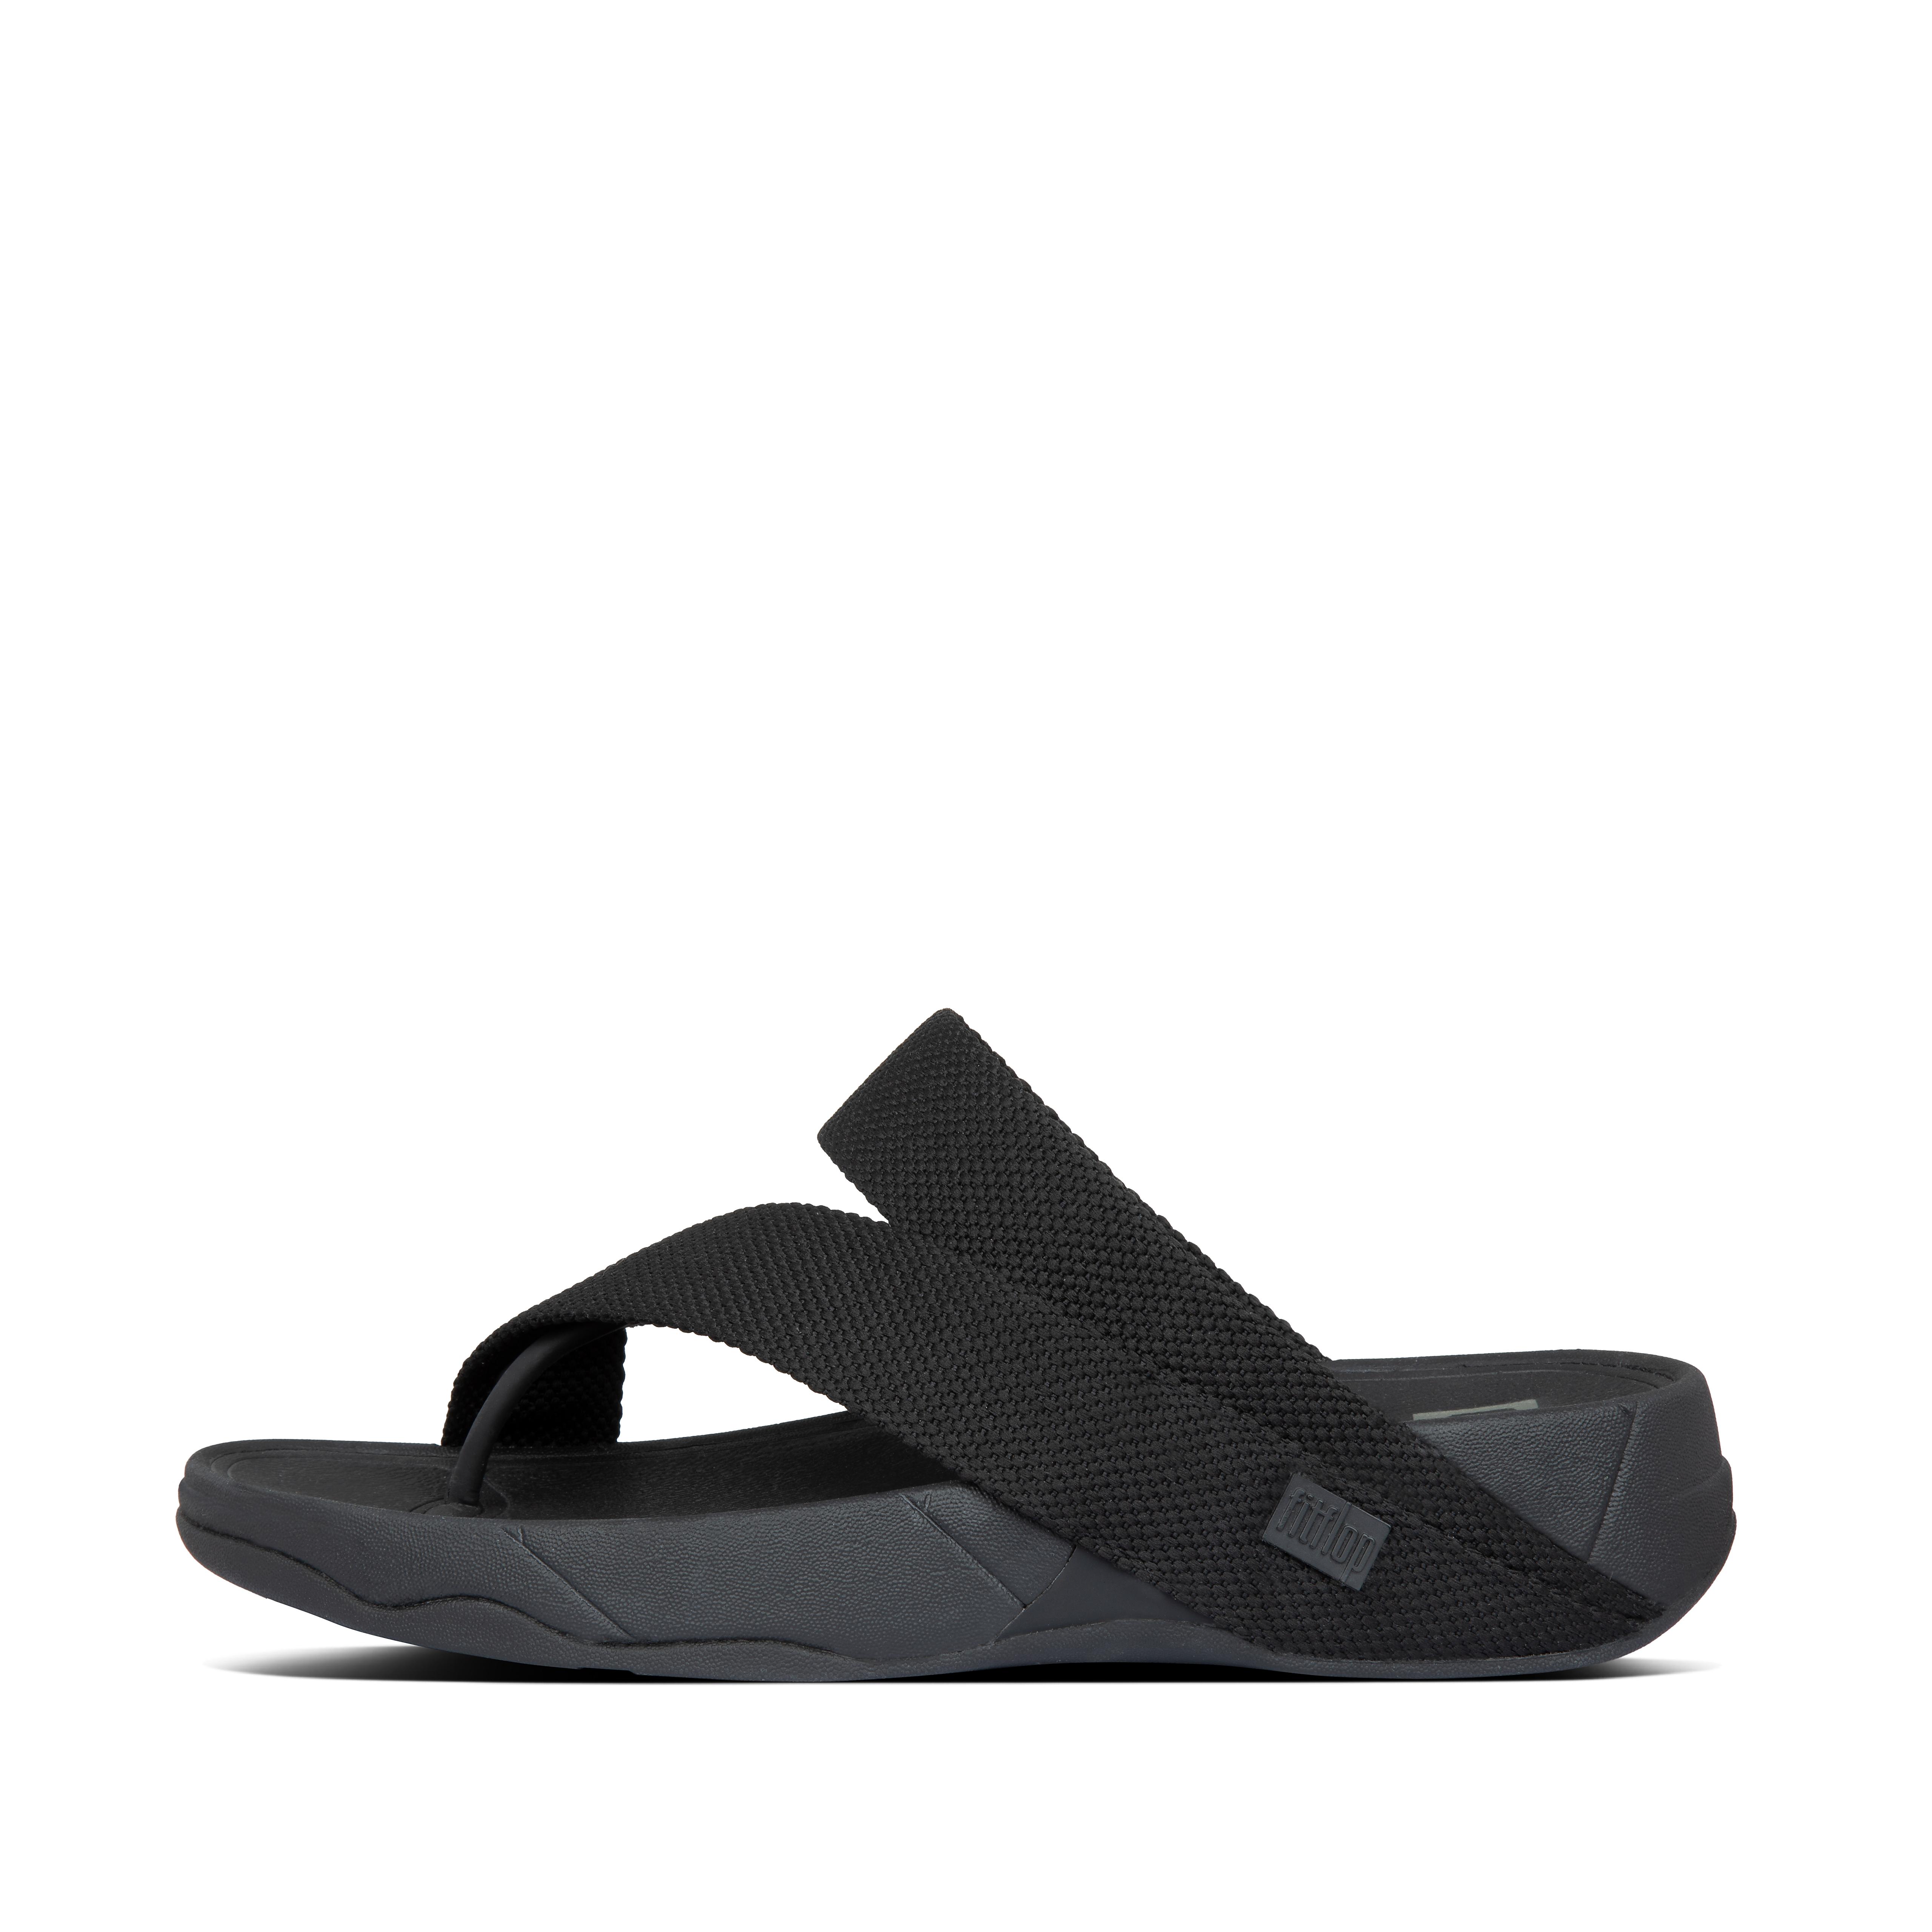 fittop sandals